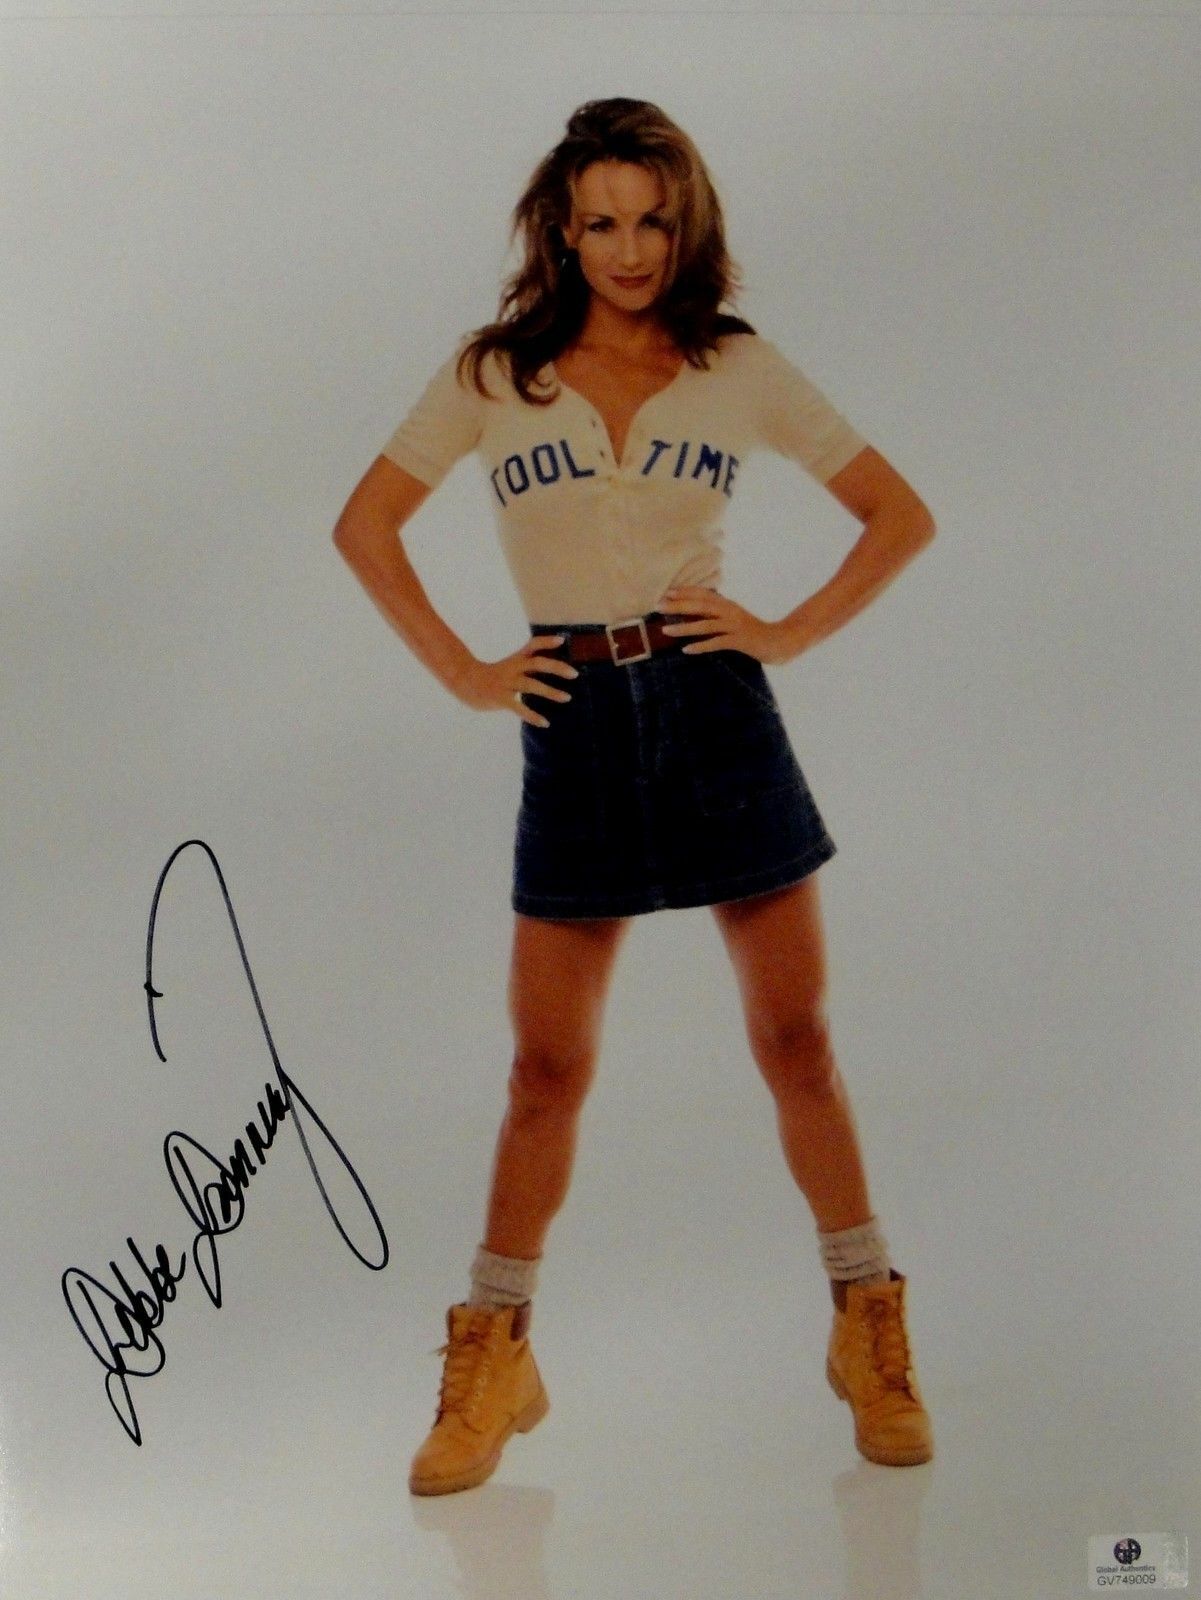 Debbe Dunning Signed Autograph 11x14 Photo Poster painting Home Improvement Heidi JSA T60126